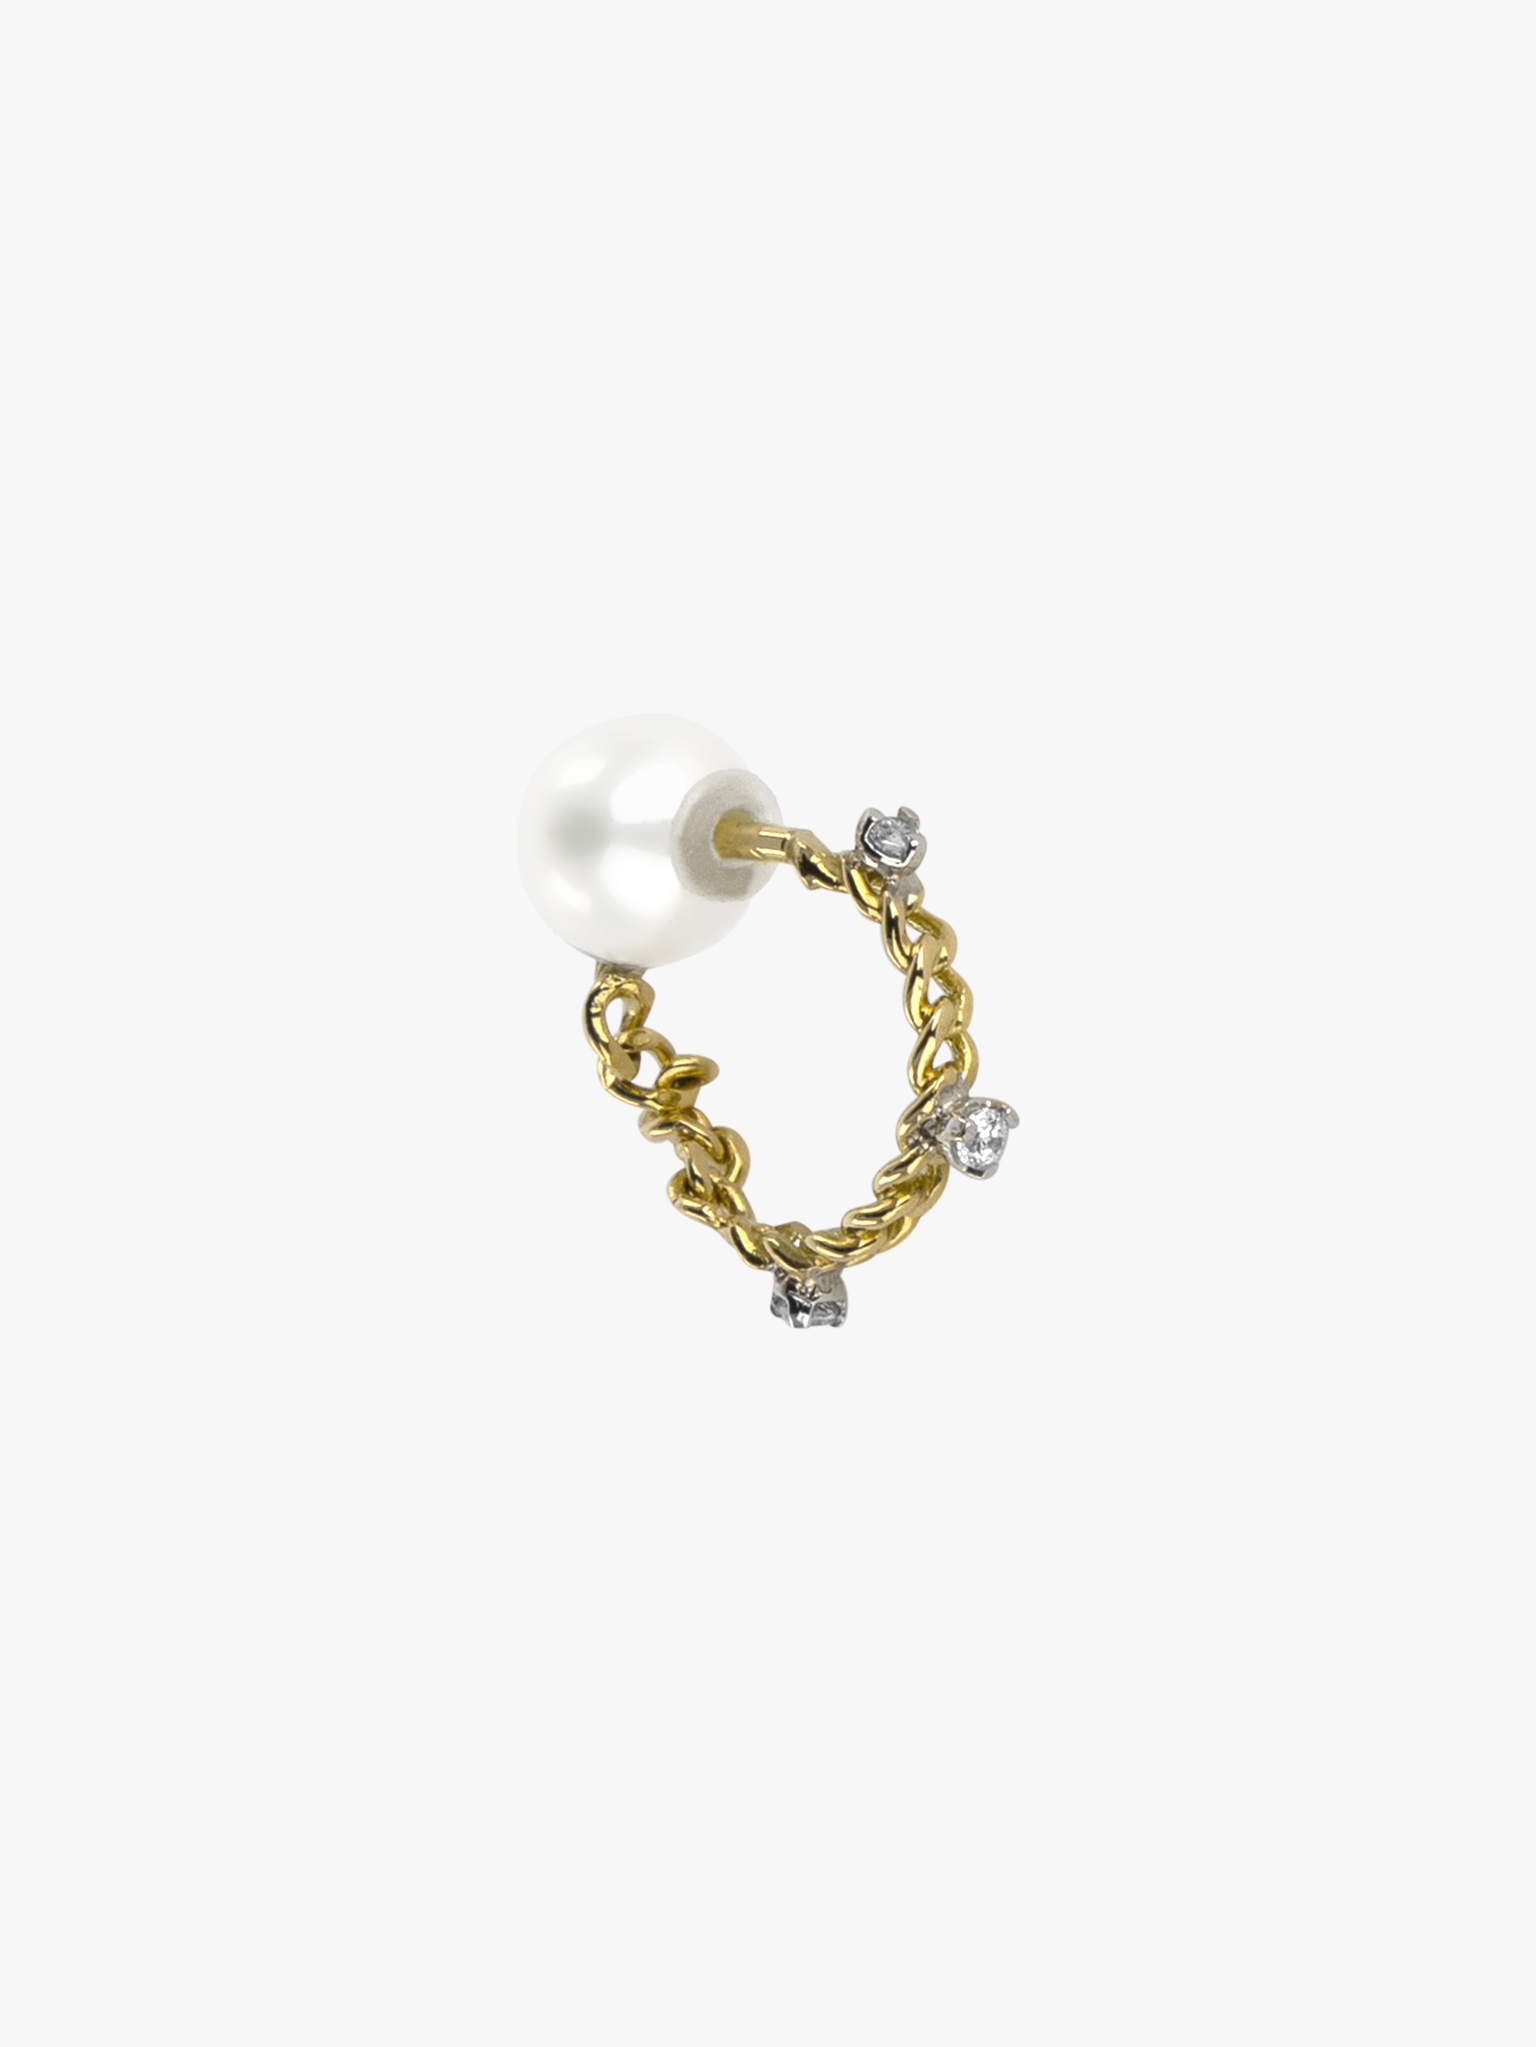 Pearl and multiple diamond chain earring